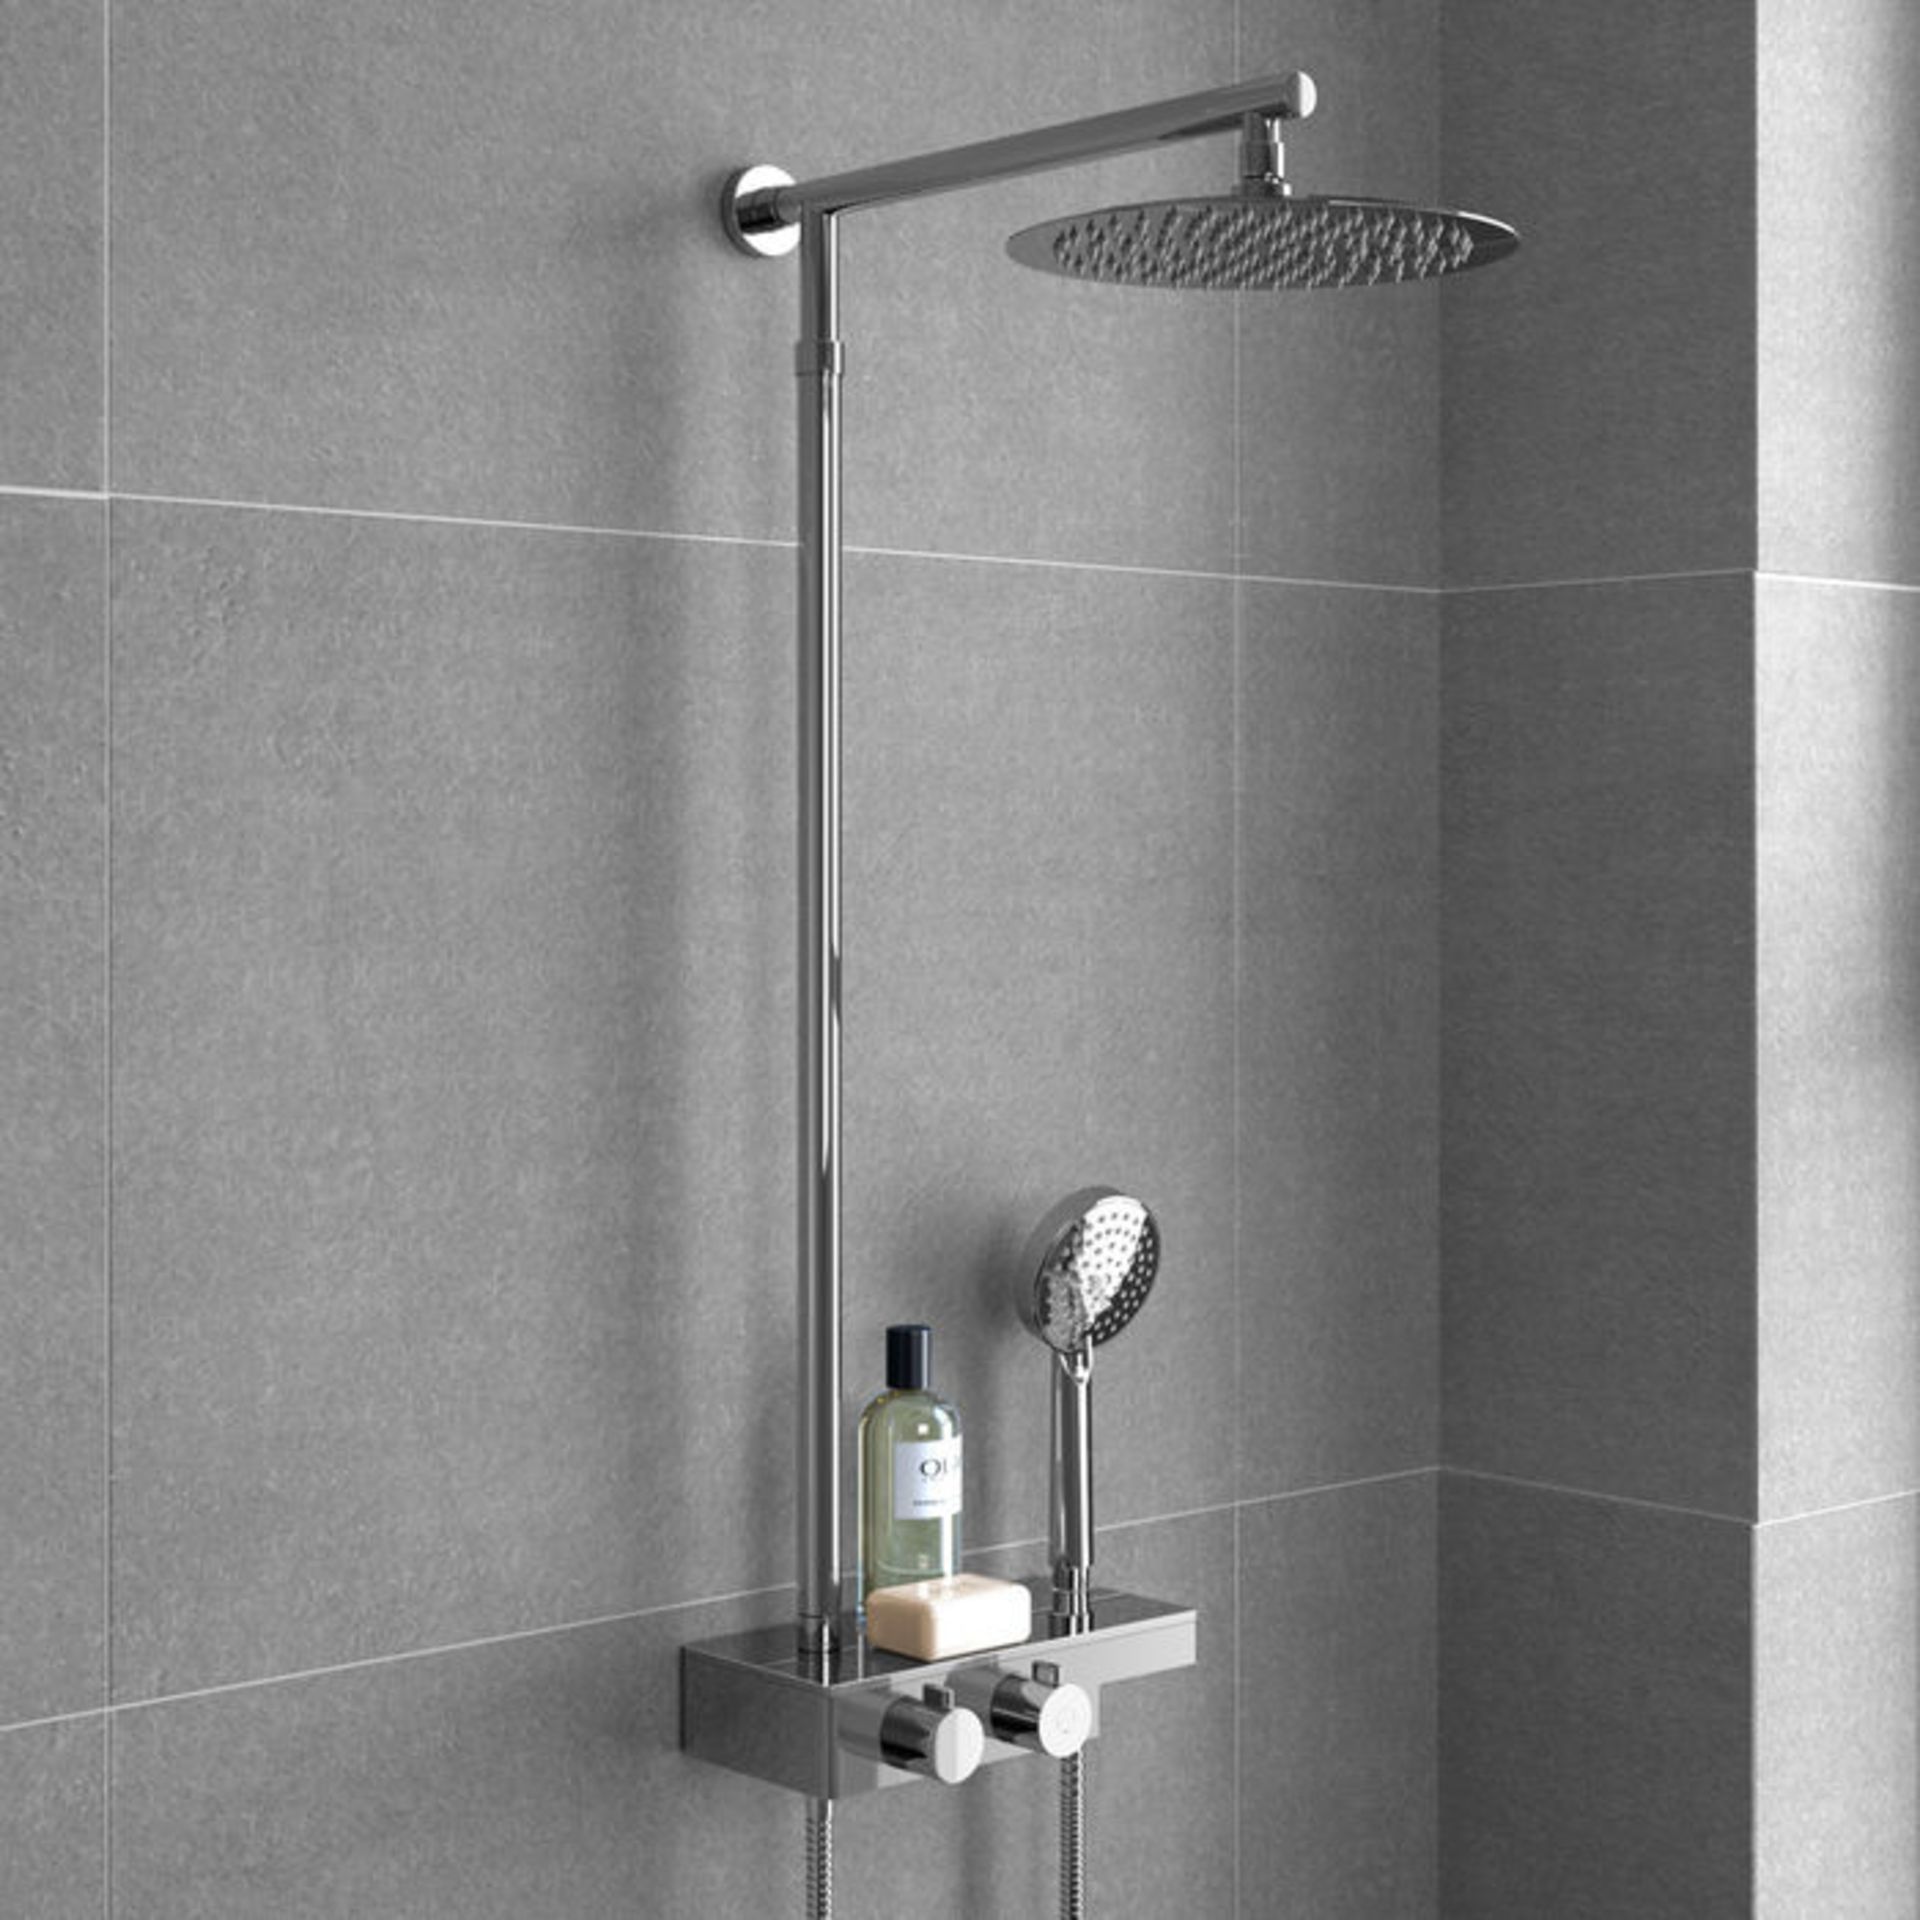 (UK264) Round Exposed Thermostatic Mixer Shower Kit & Large Head. Cool to touch shower for - Image 3 of 4